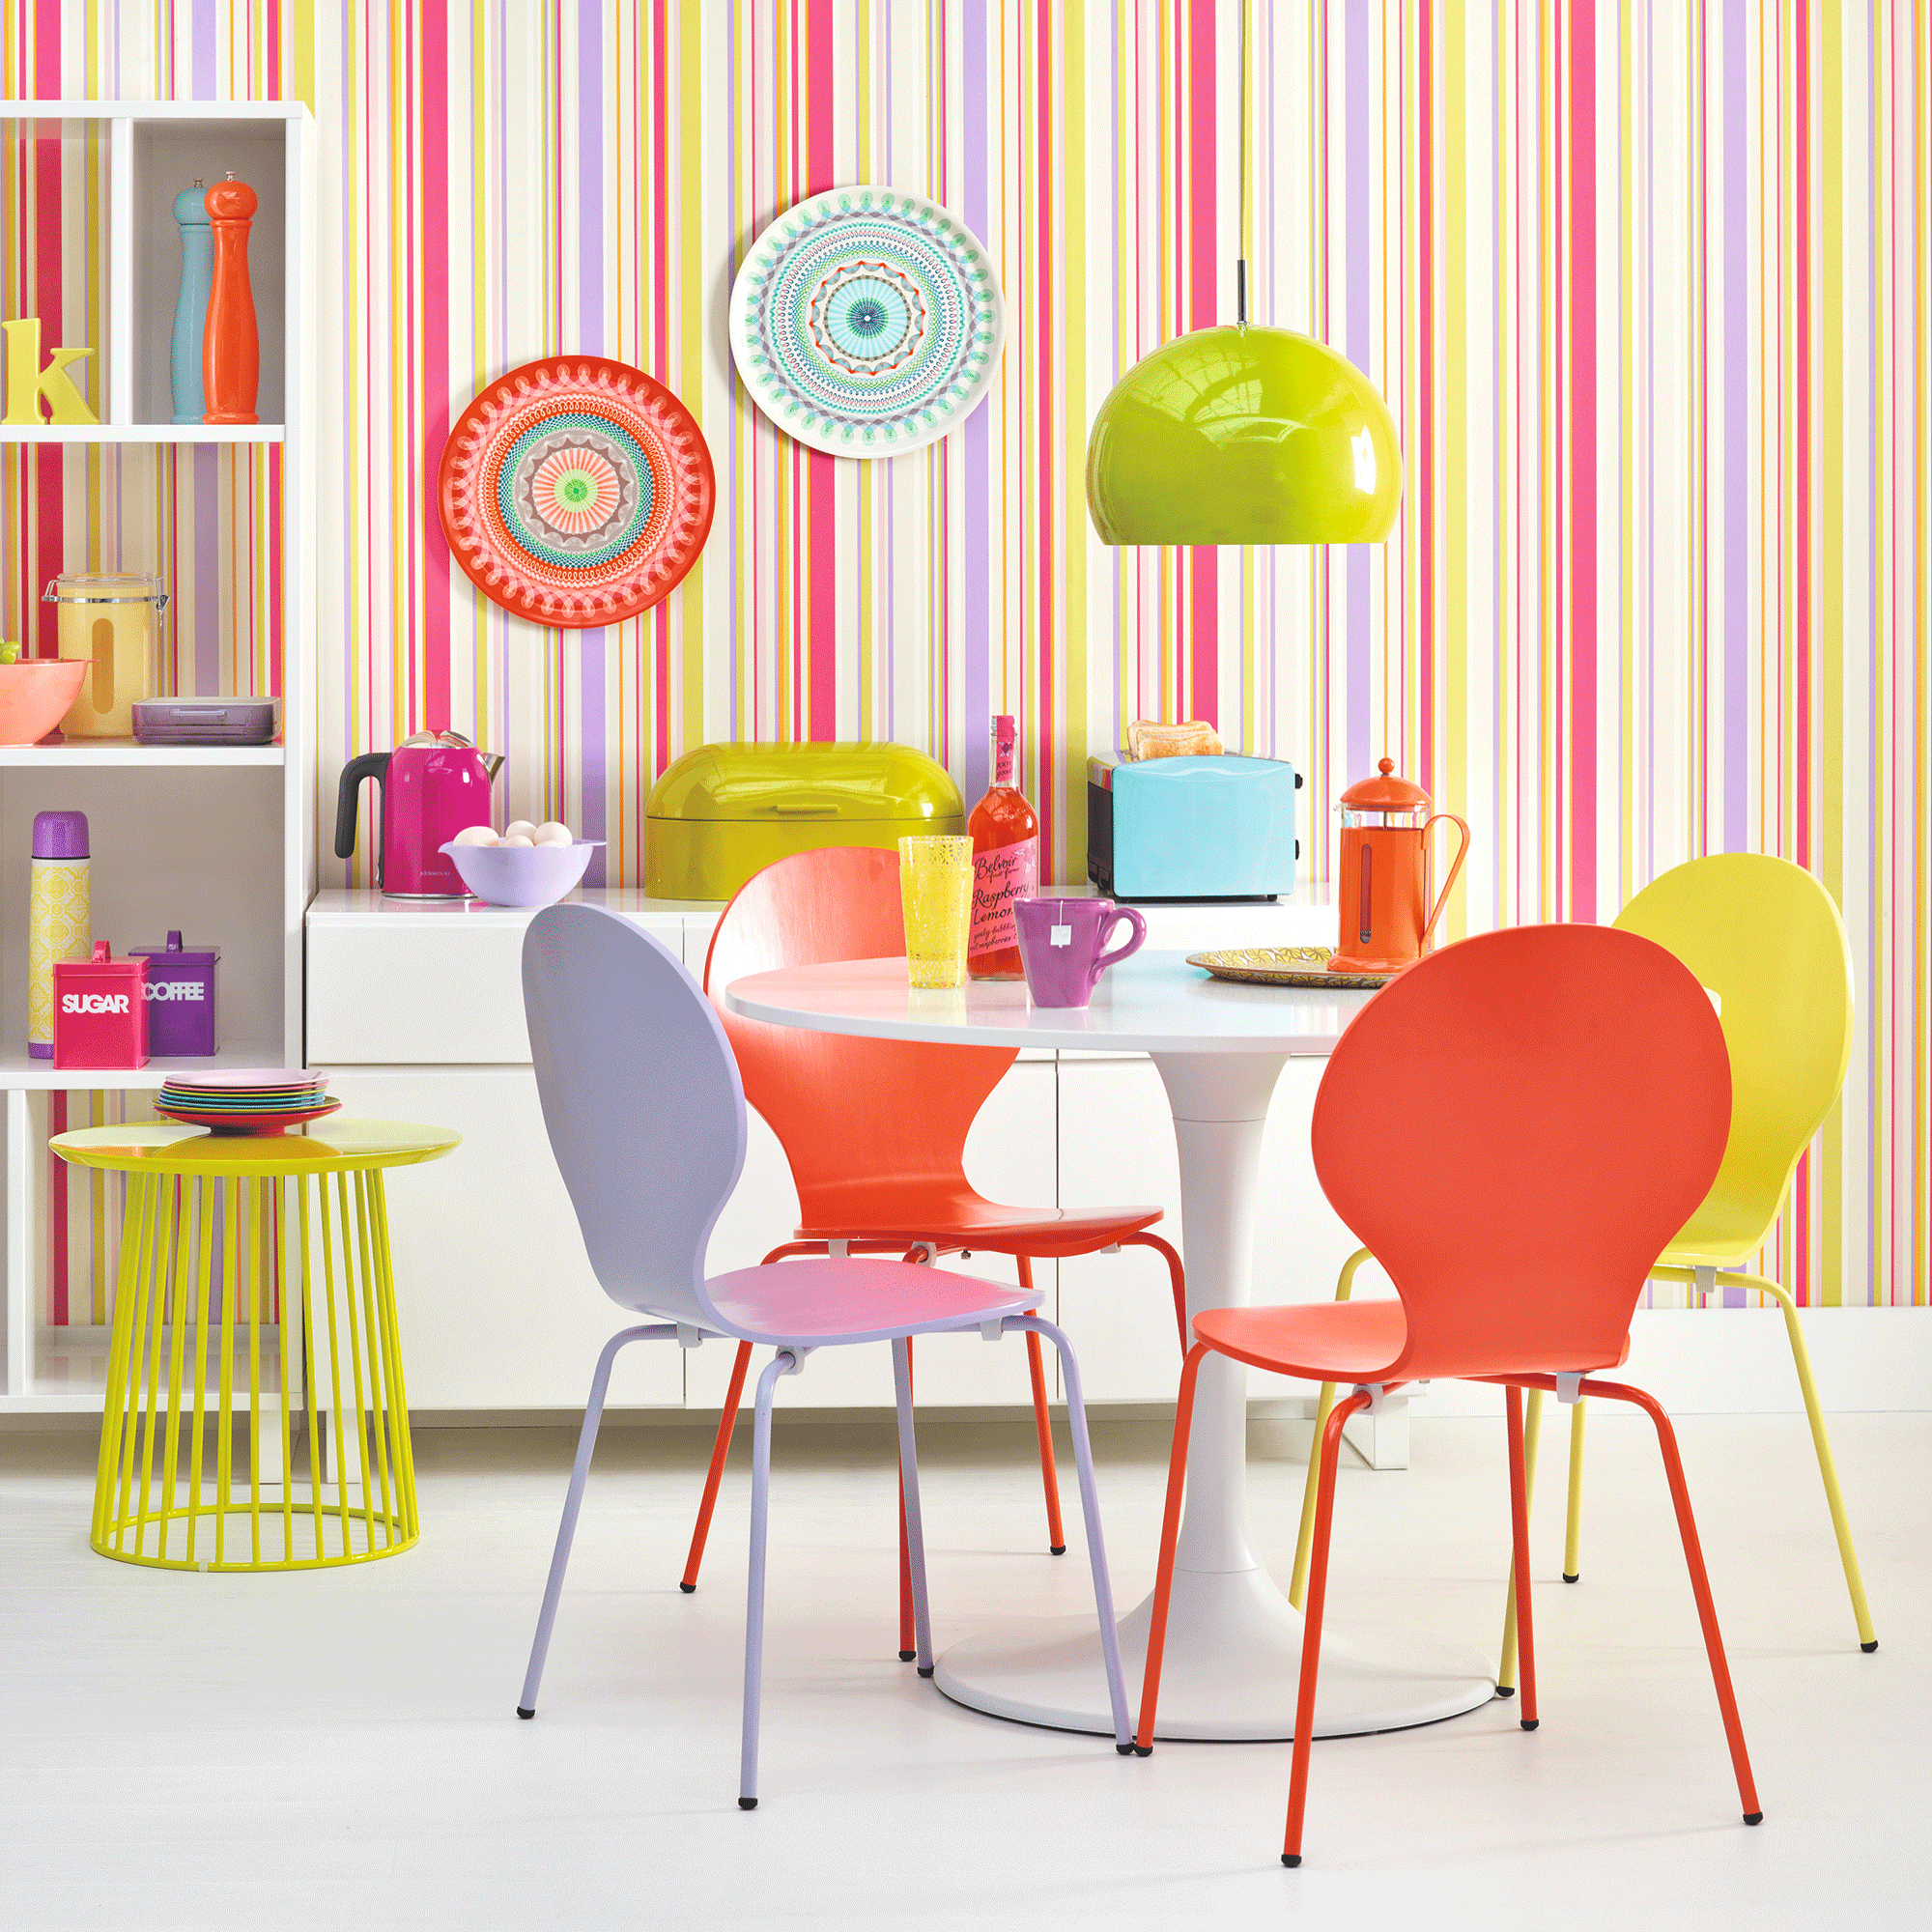 Striped walls and coloured chairs